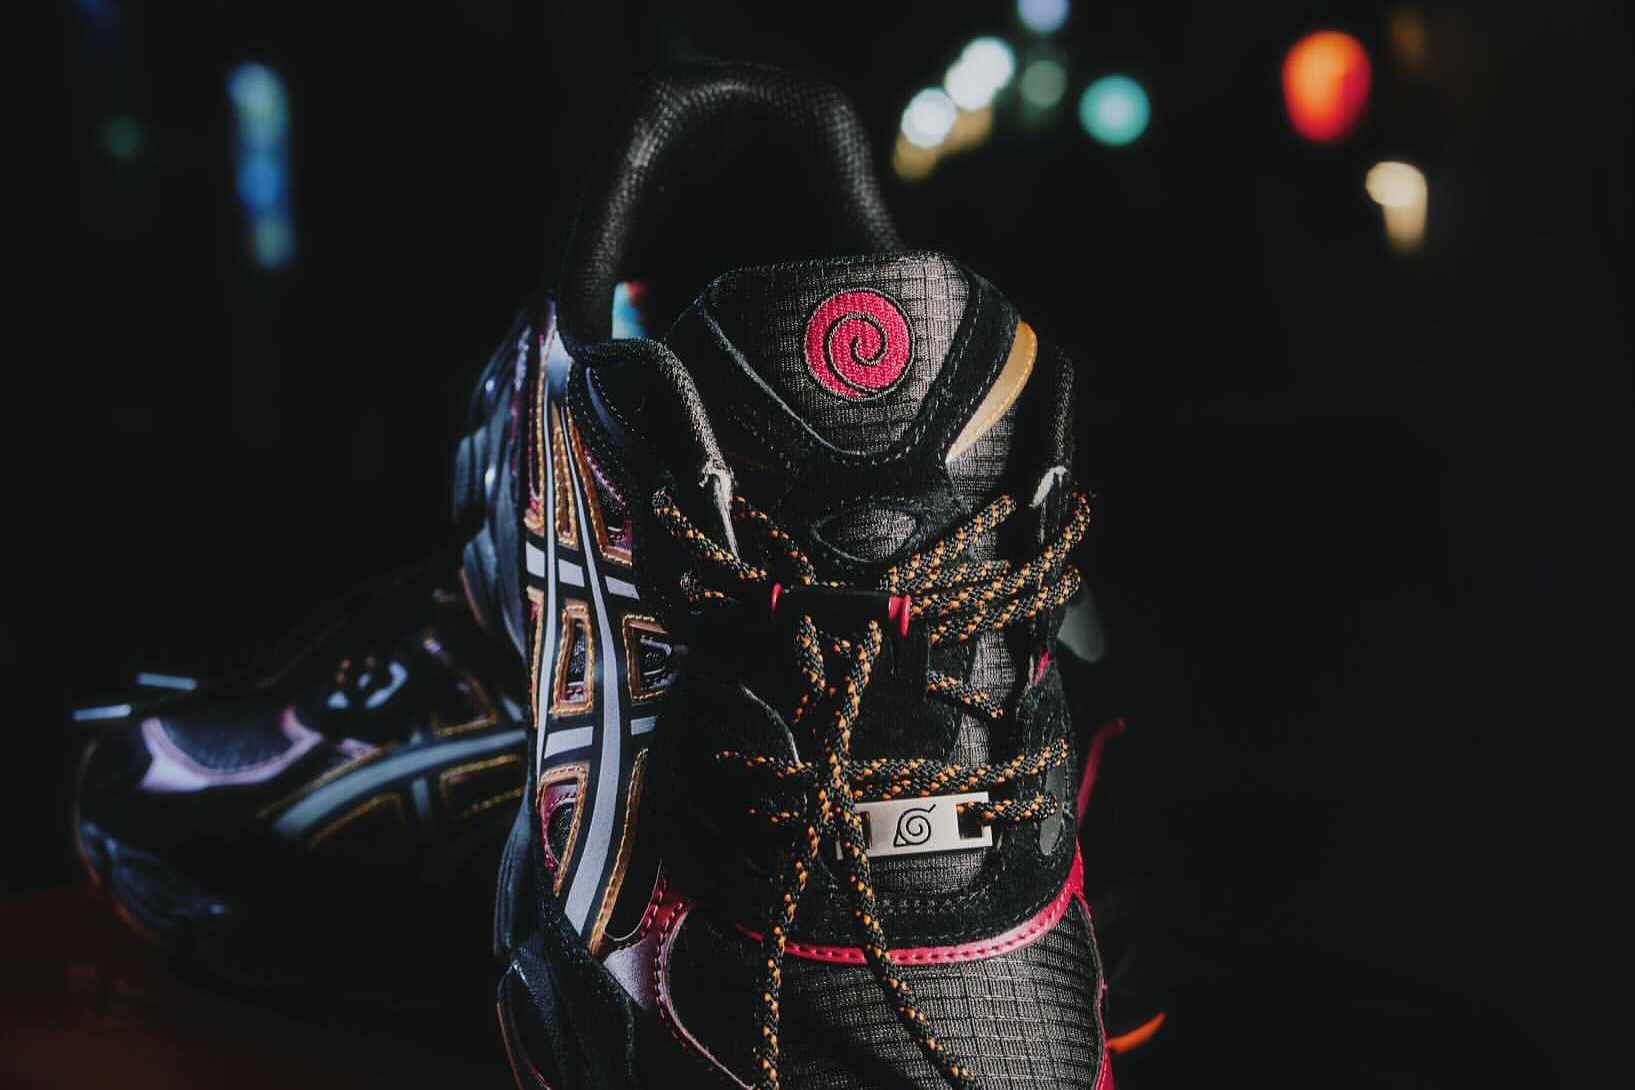 Photos of the Naruto x ASICS GEL-NYC "Final Arc" sneaker collab